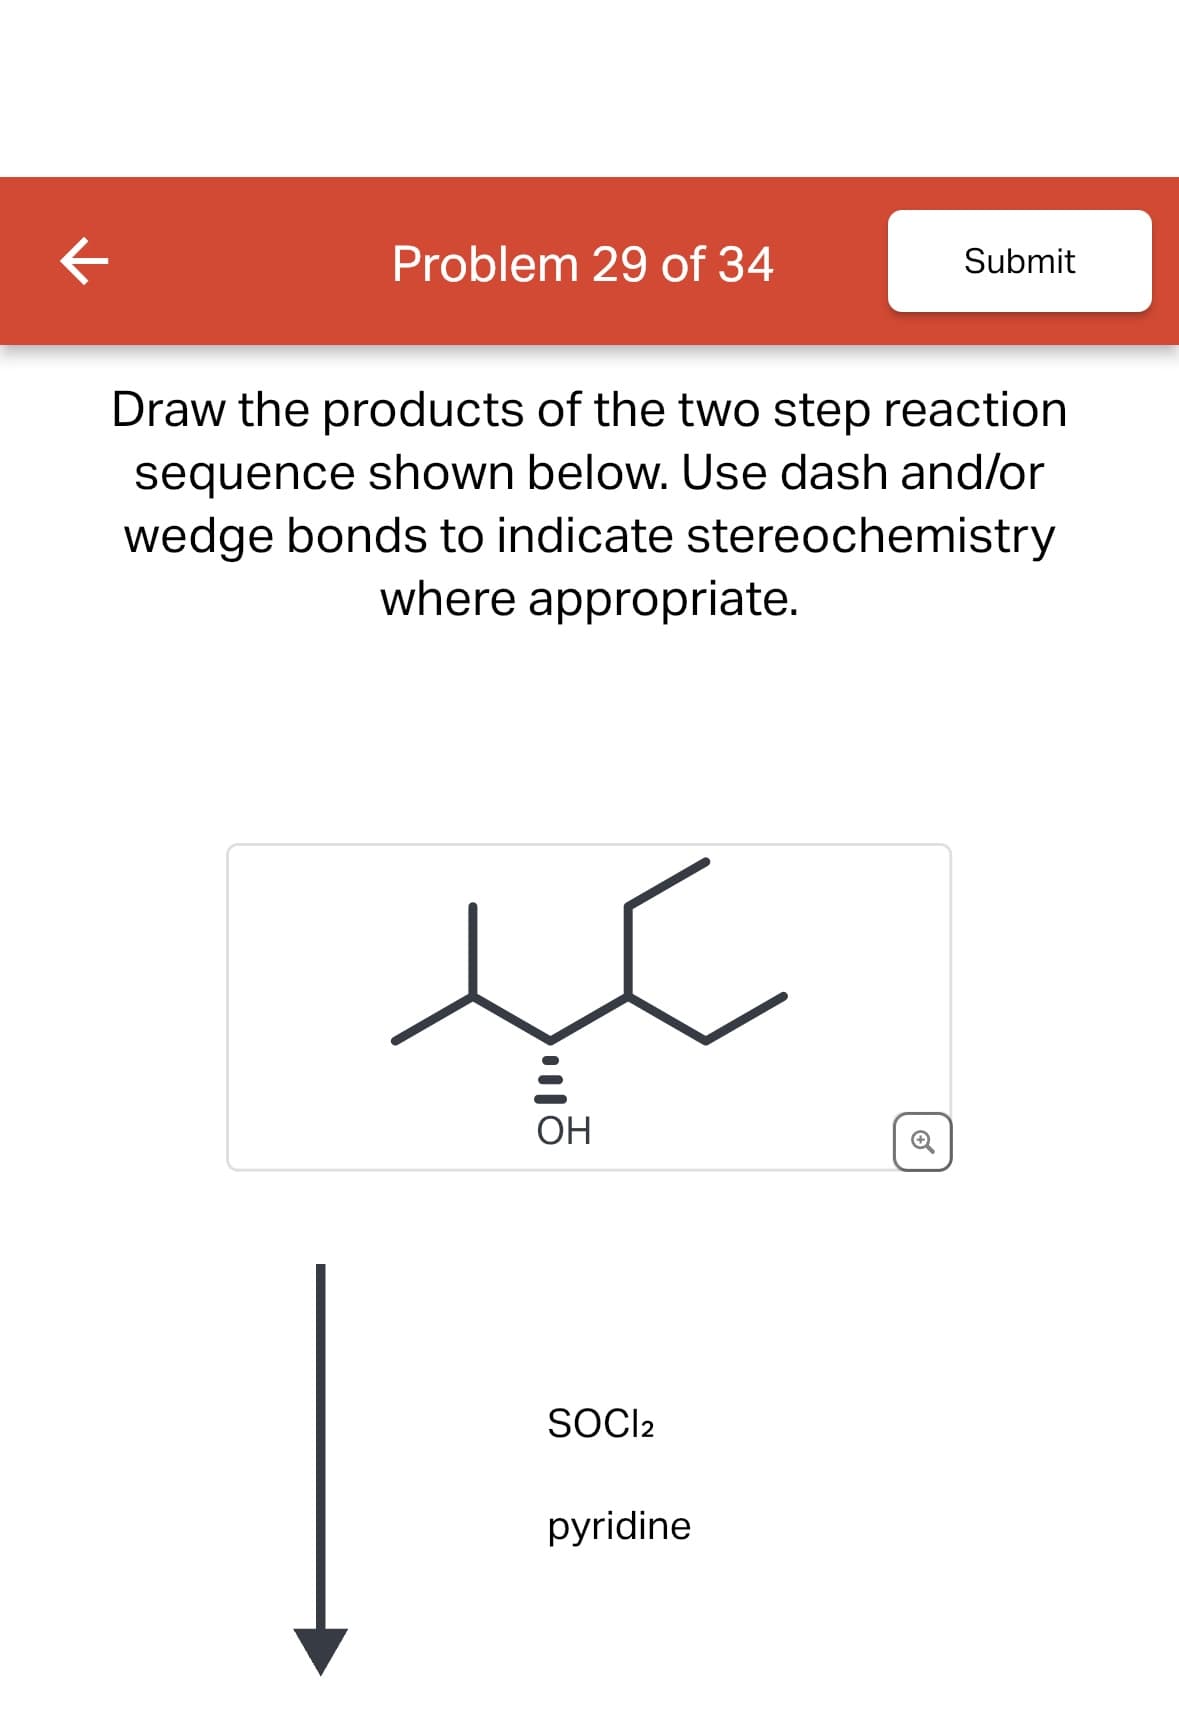 K
Problem 29 of 34
Draw the products of the two step reaction
sequence shown below. Use dash and/or
wedge bonds to indicate stereochemistry
where appropriate.
!!!
OH
SOCI2
Submit
pyridine